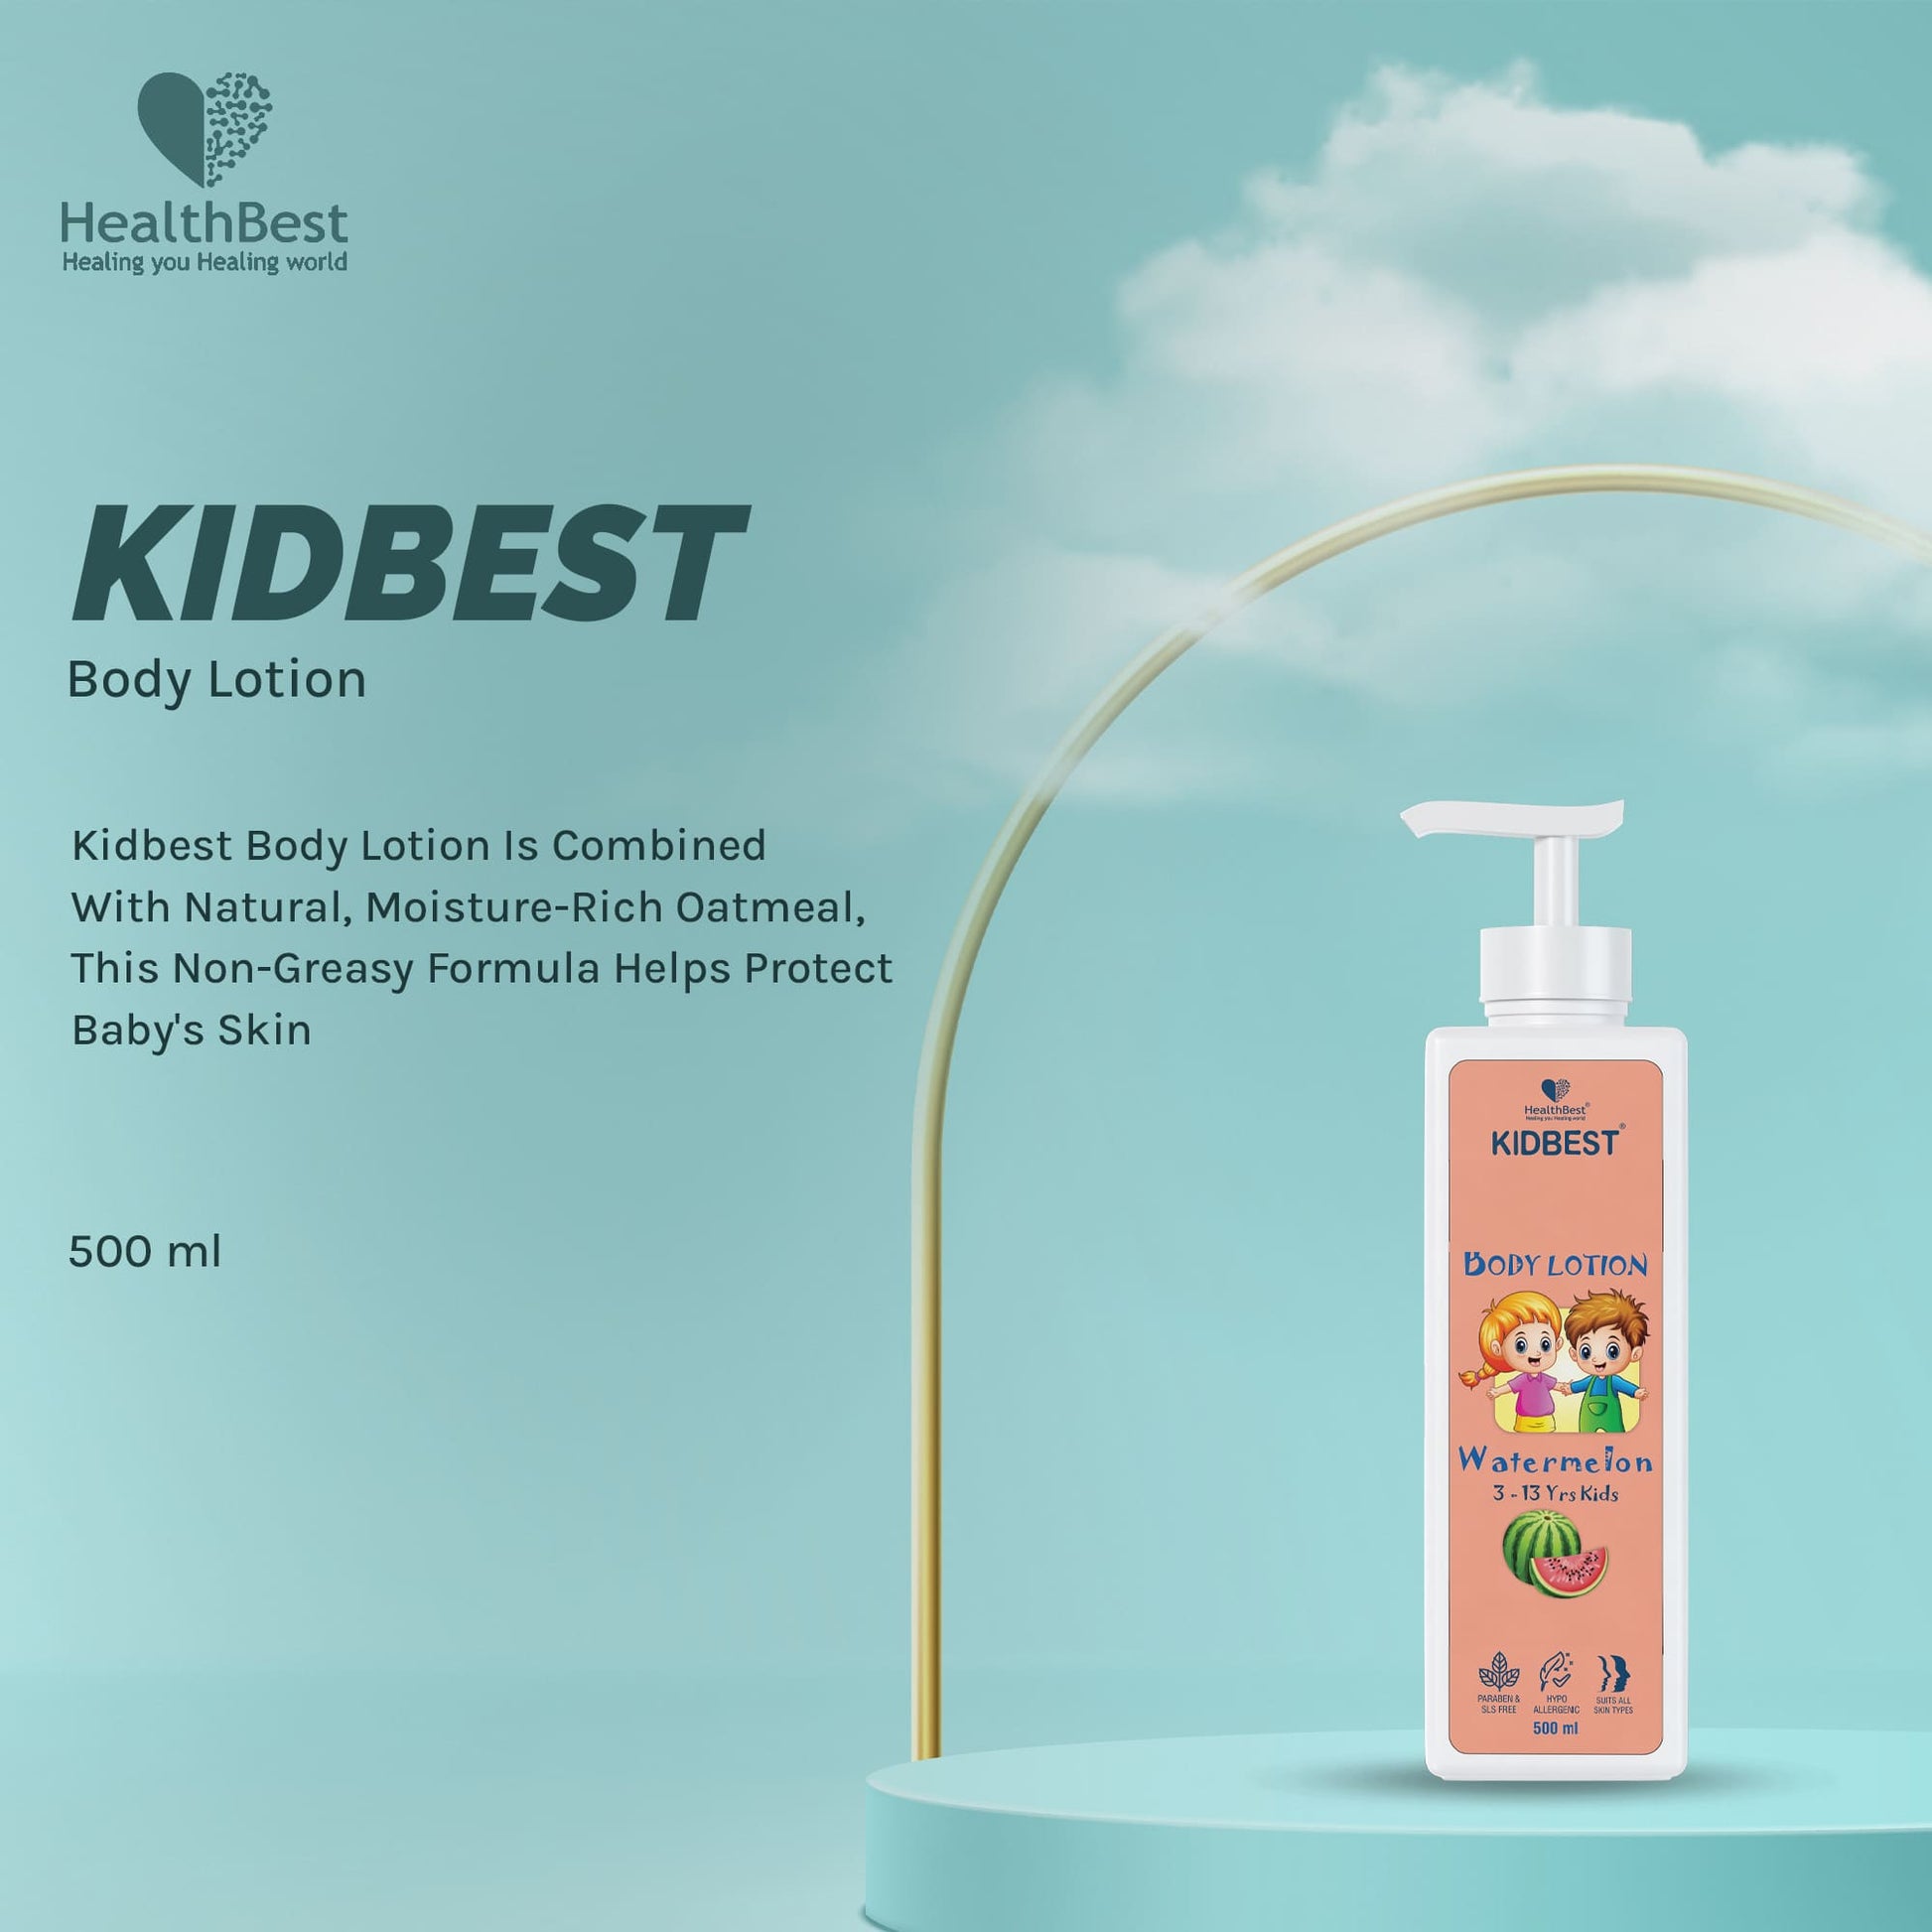 HealthBest Kidbest Body Lotion for Kids